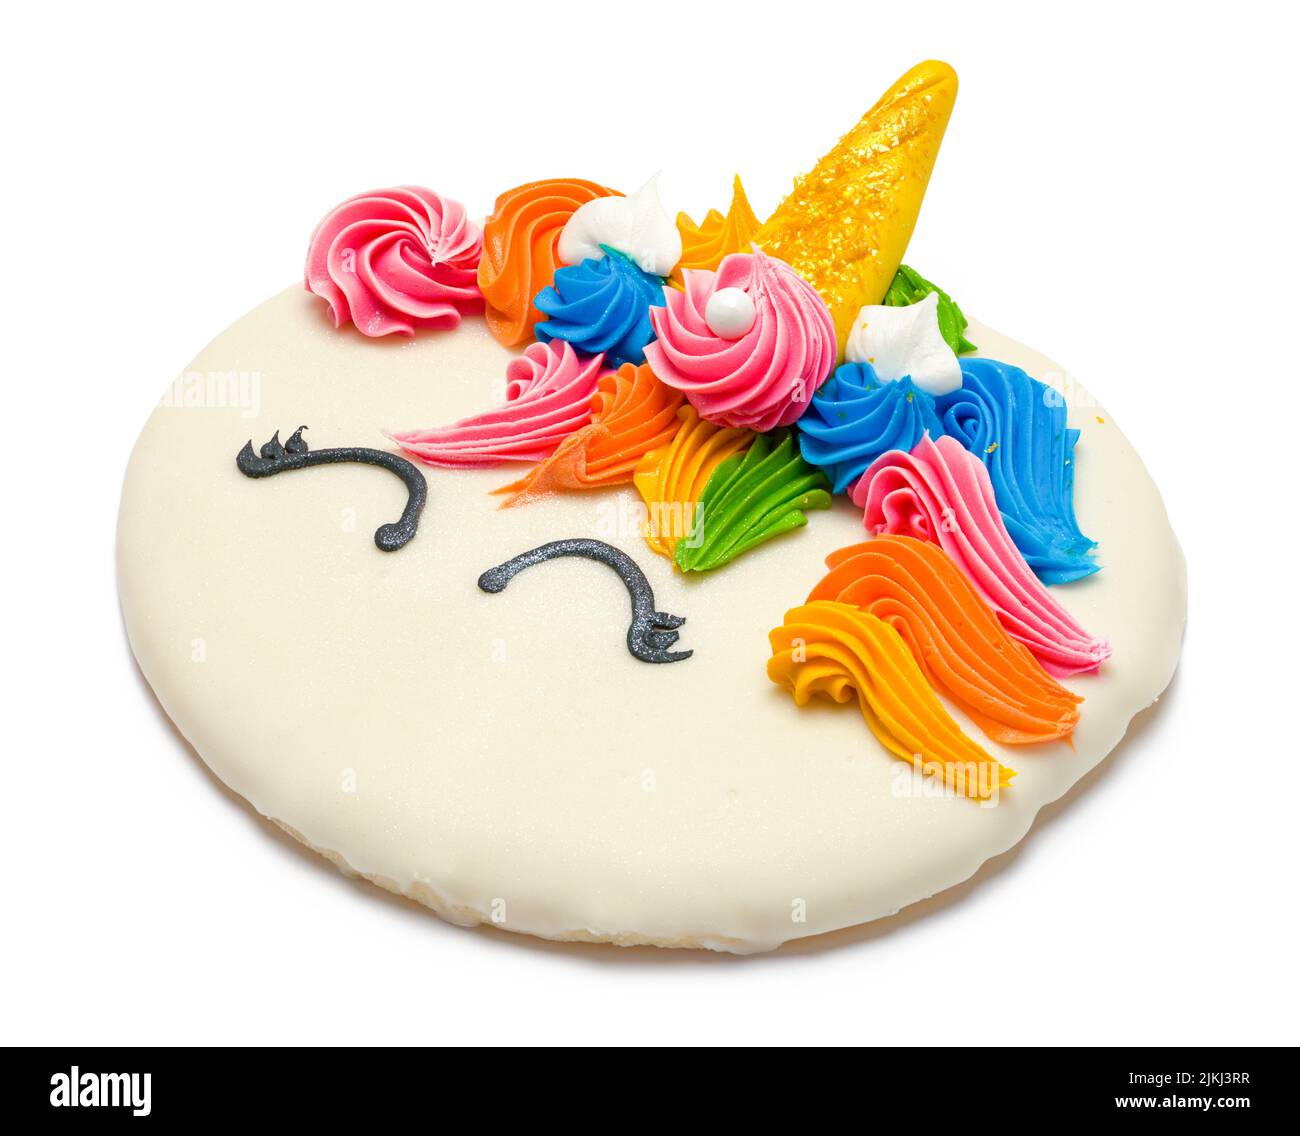 Frosted Unicorn Sugar Cookie Cut Out on White. Stock Photo